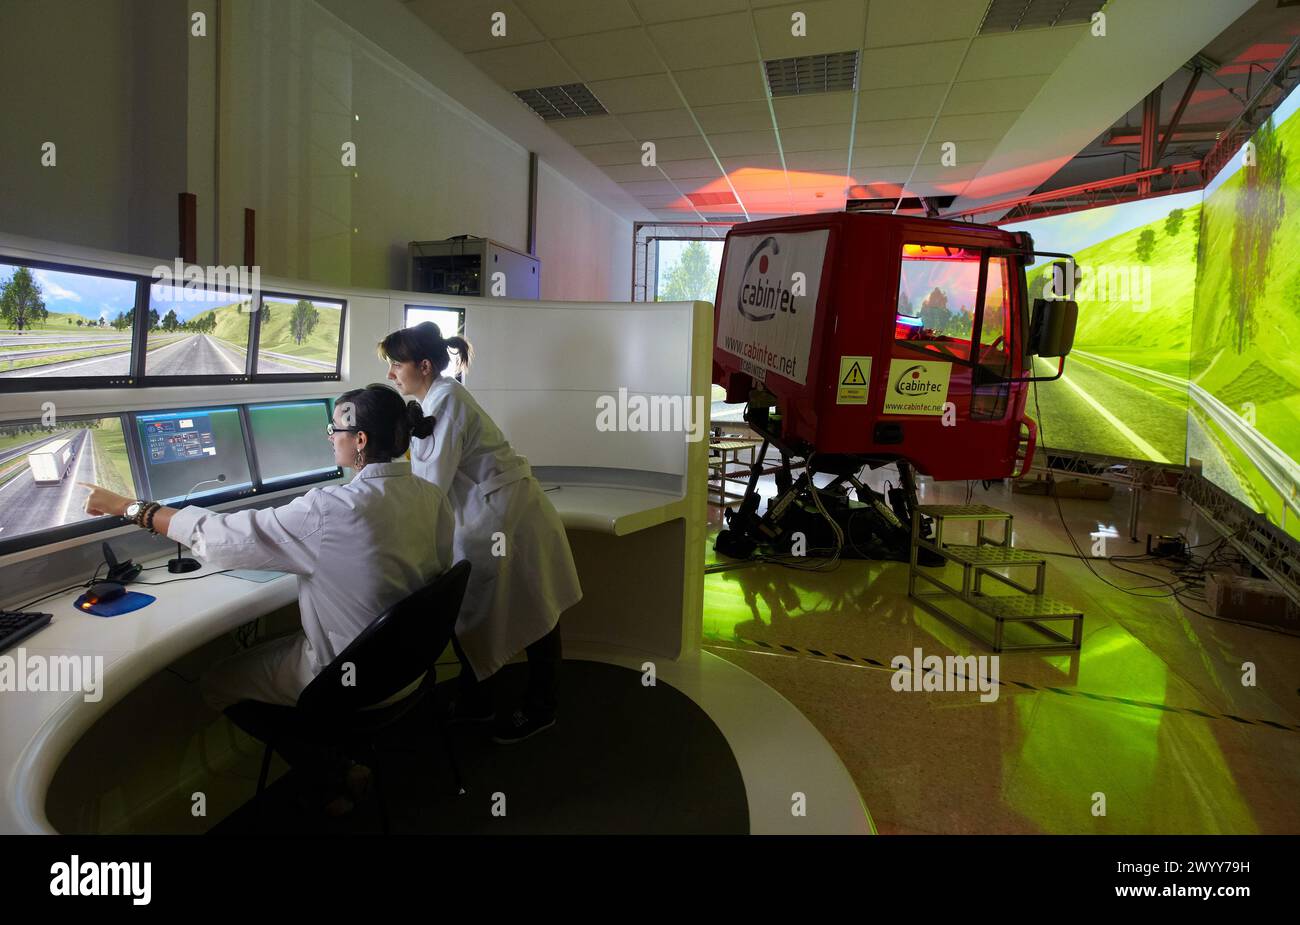 Mixed Simulator truck / bus System Integration in the architecture itself in actual vehicles Study of different HMI Human Machine Interface Group ITS Intelligent Transport System Simulation Area Department of Applied Mechanics CEIT Center of Studies and Technical Research University of Navarra, Donostia, Gipuzkoa, Basque Country, Spain. Stock Photo